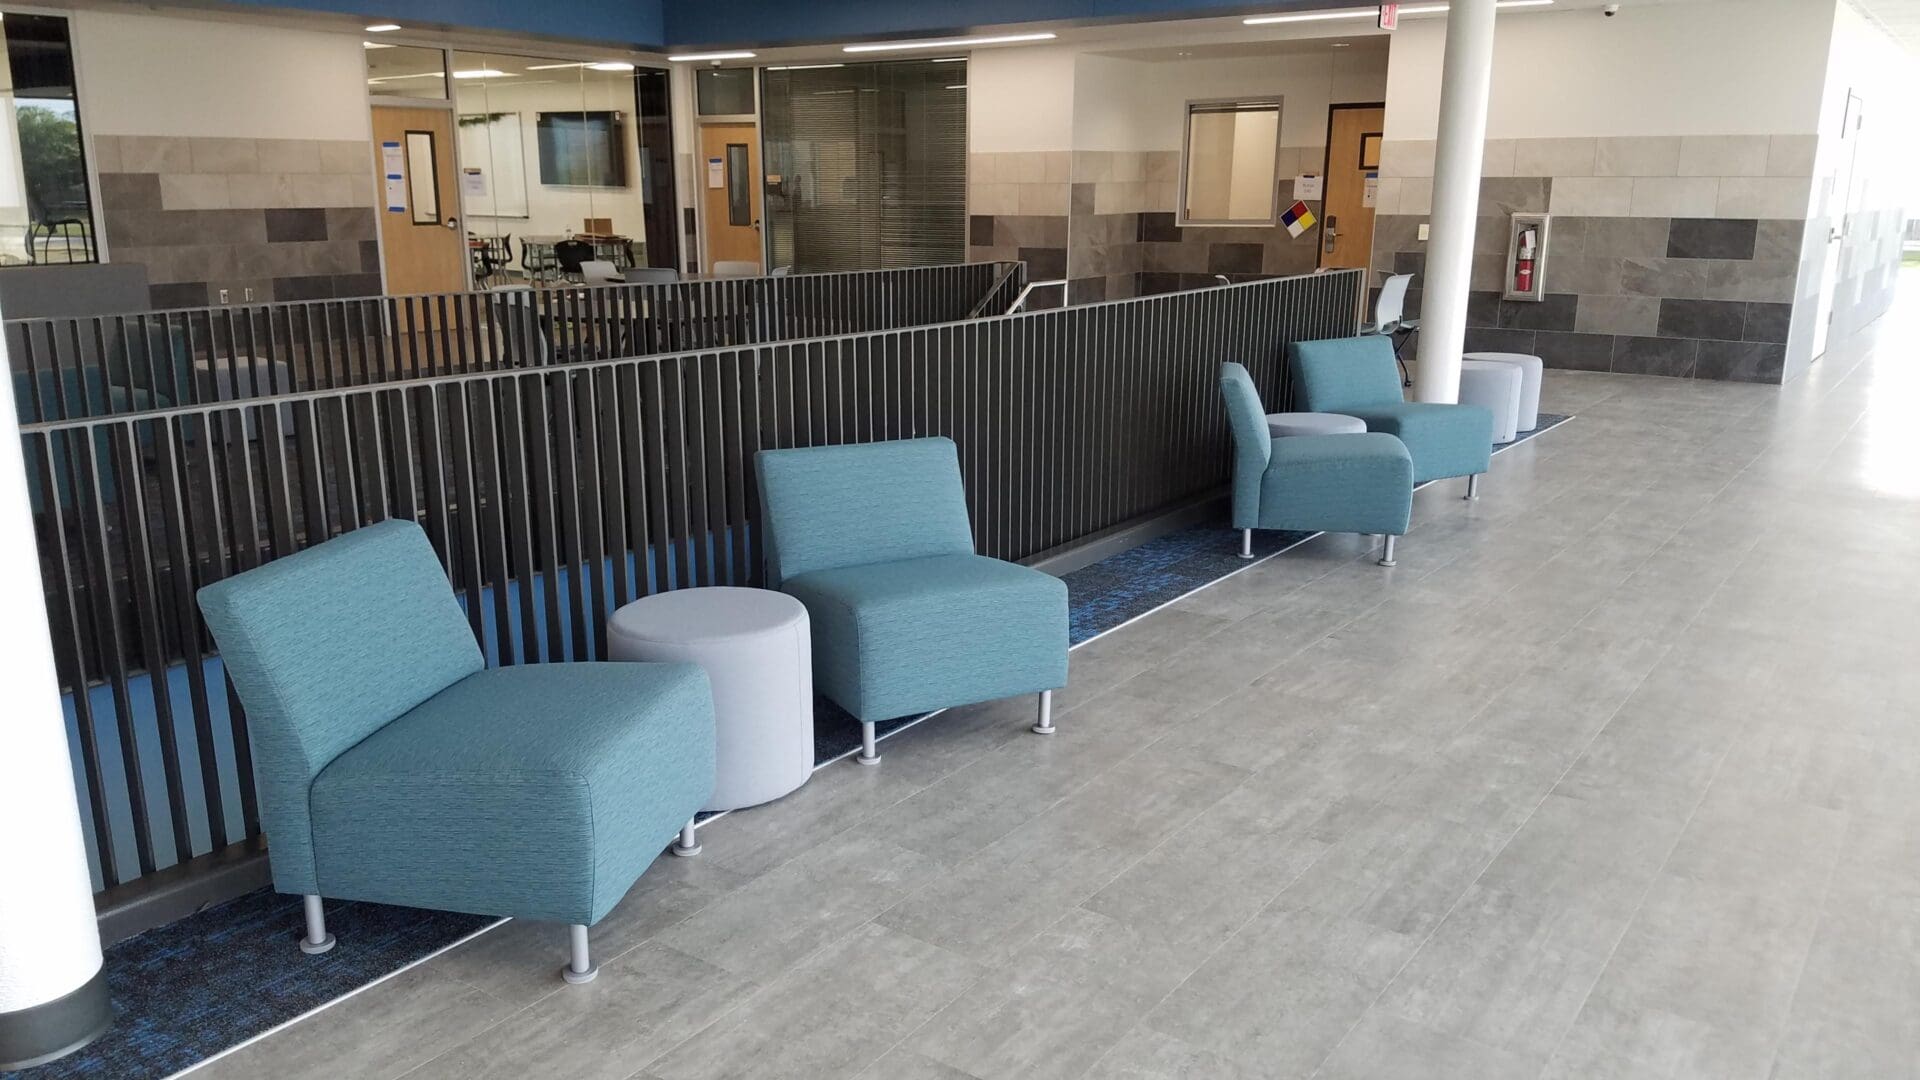 A row of blue chairs in an office building.